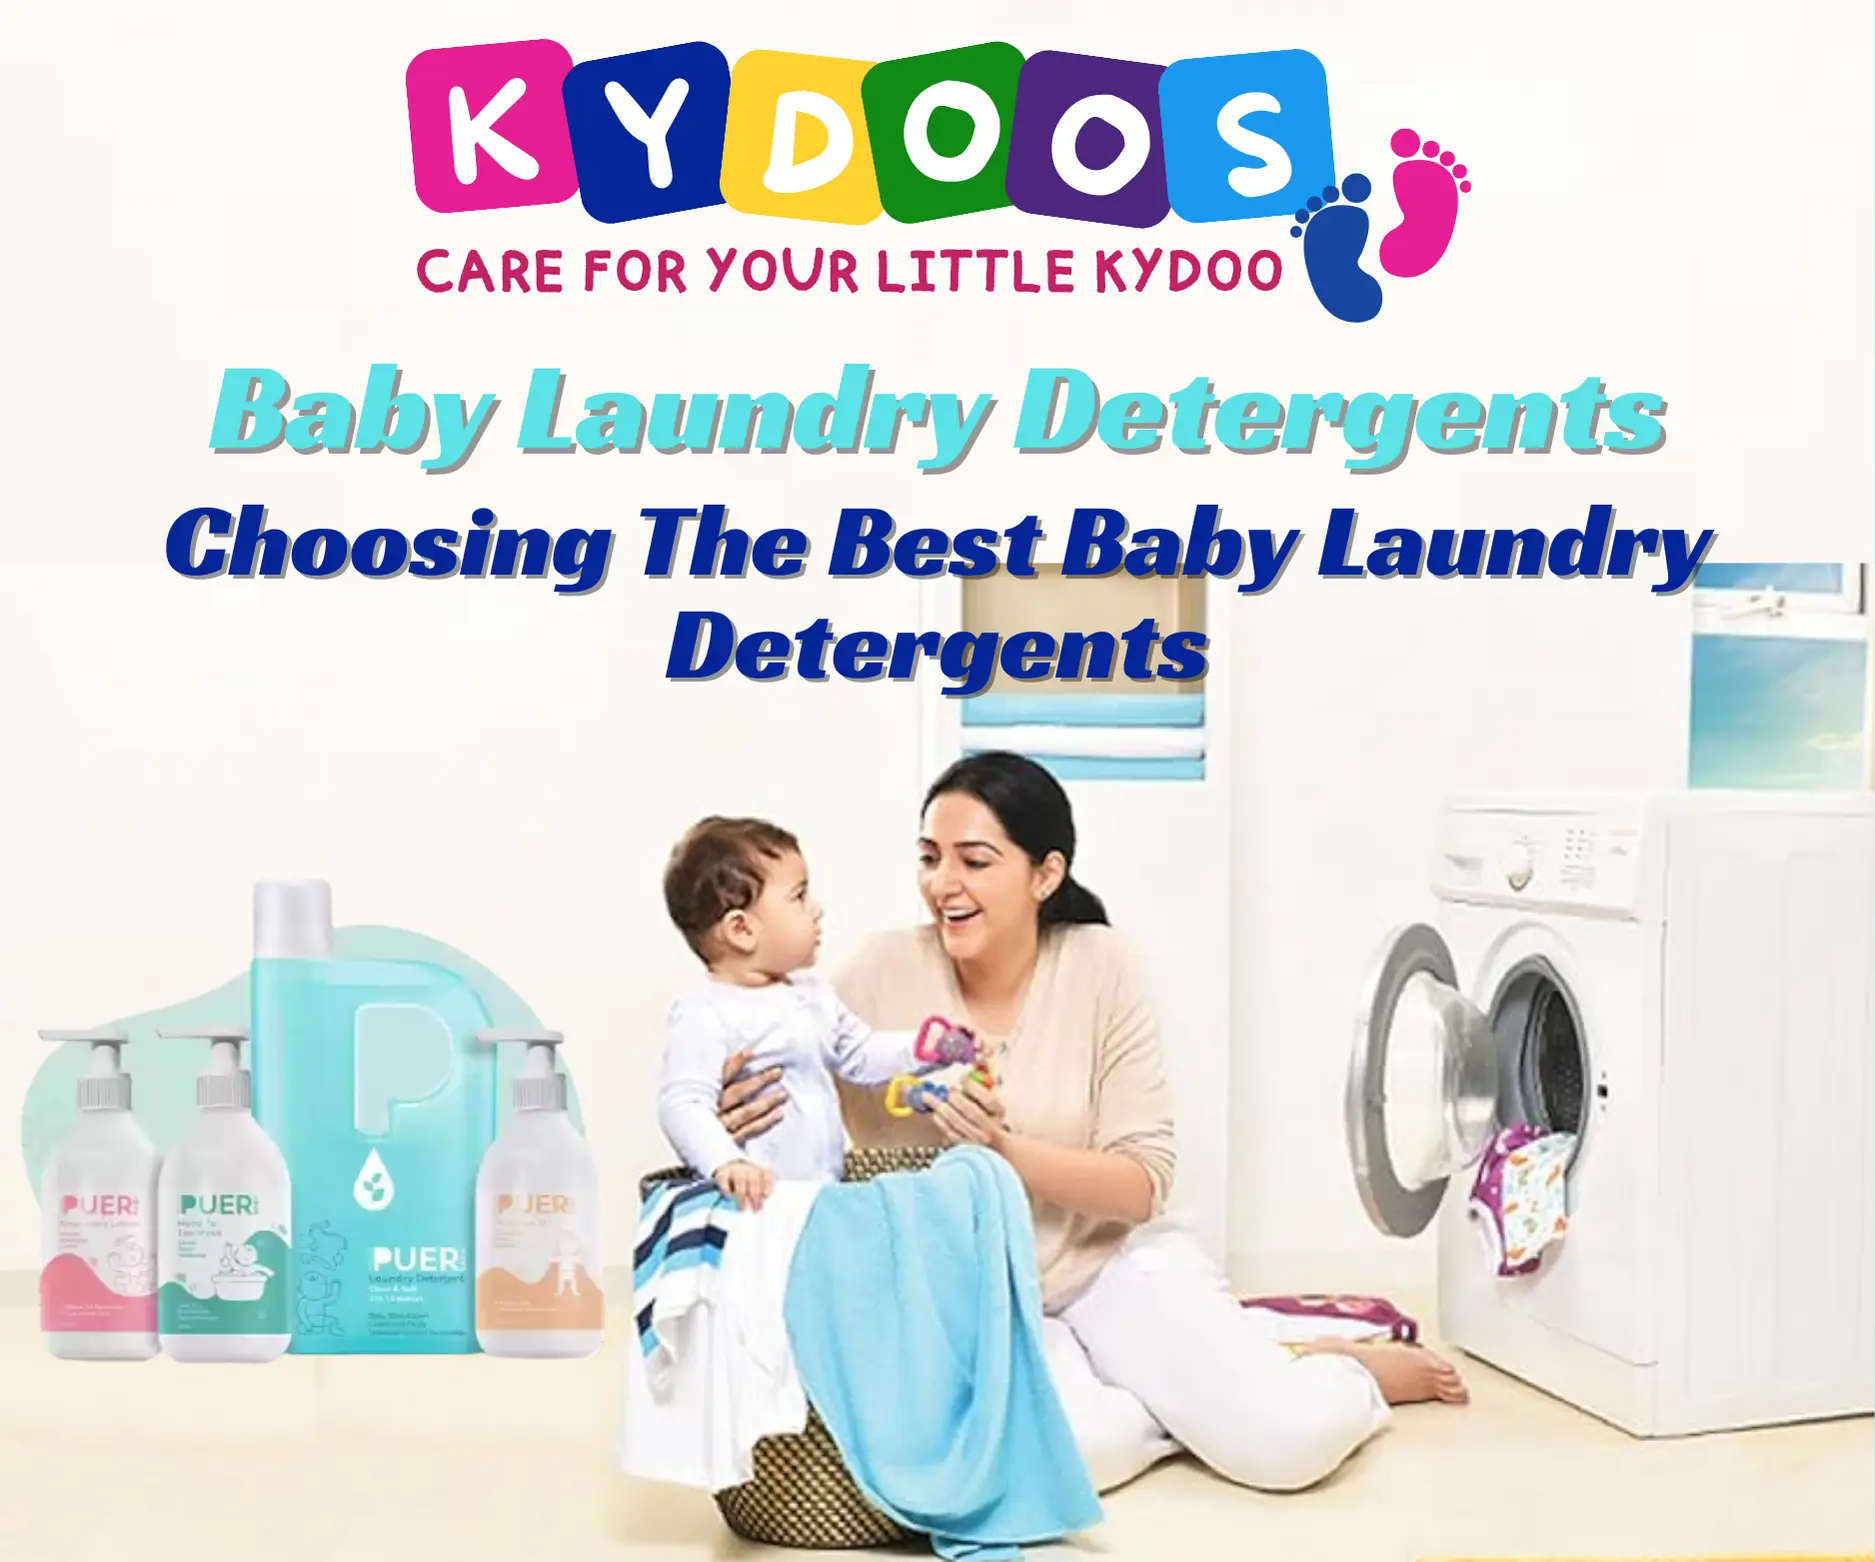 Baby Laundry Detergents Mobile